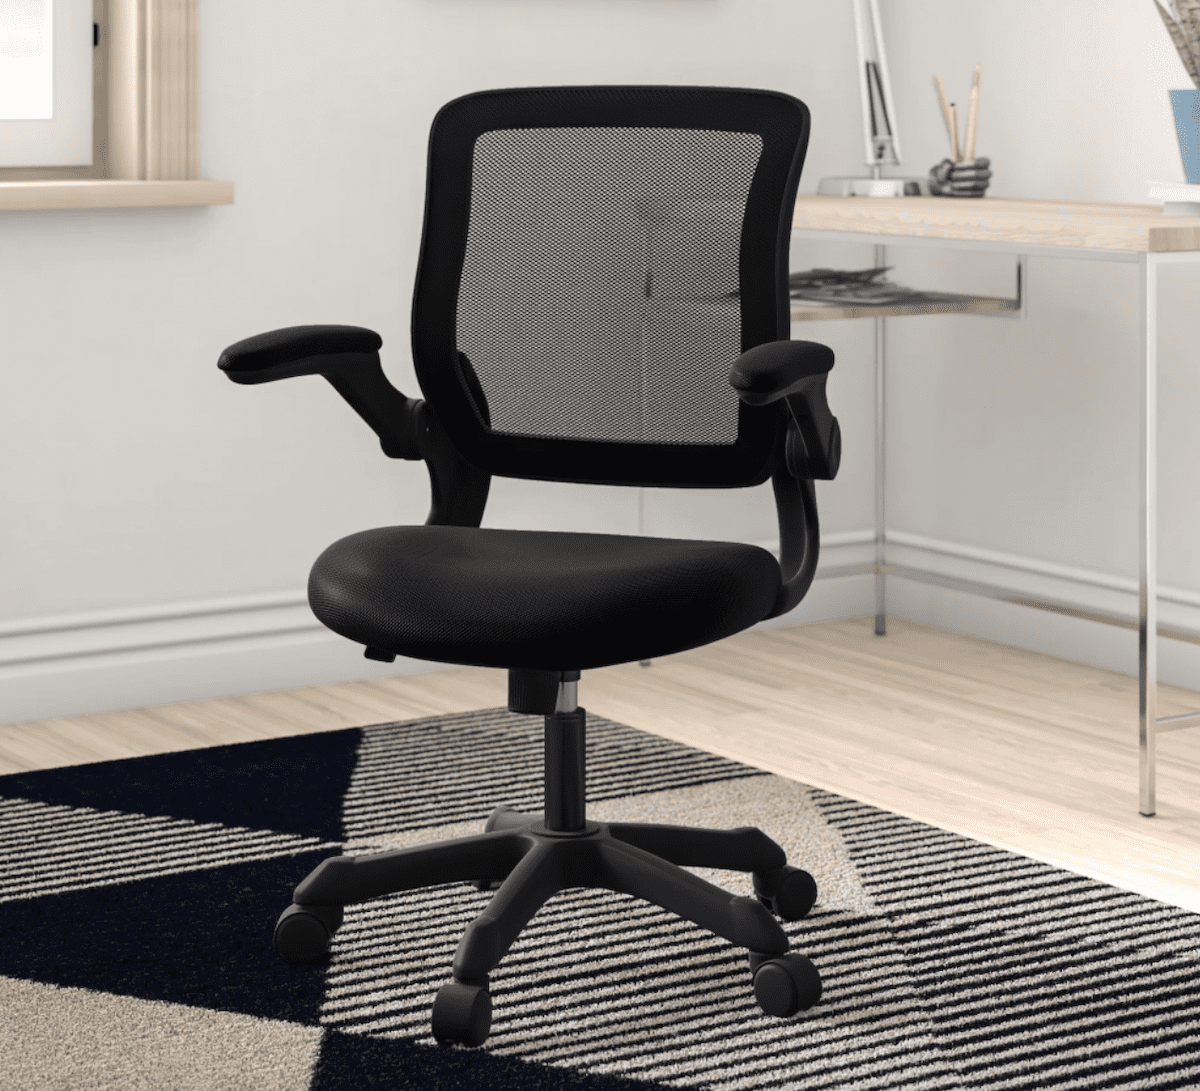 http://cdn.apartmenttherapy.info/image/upload/v1651672615/at/product%20listing/Jarielys_Ergonomic_Task_Chair_Wayfair.png